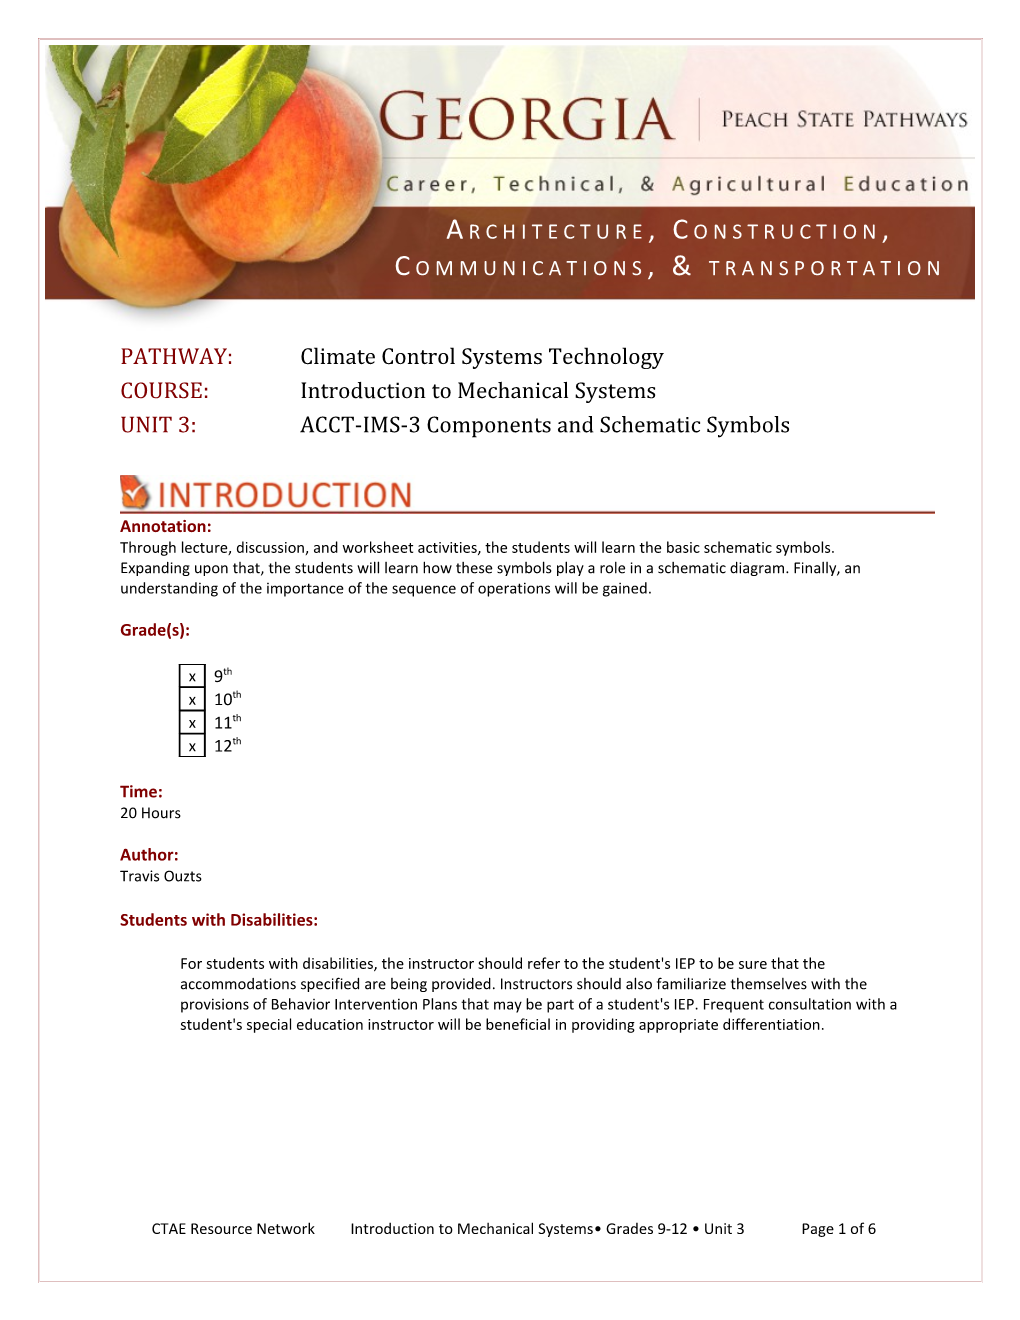 PATHWAY: Climate Control Systems Technology